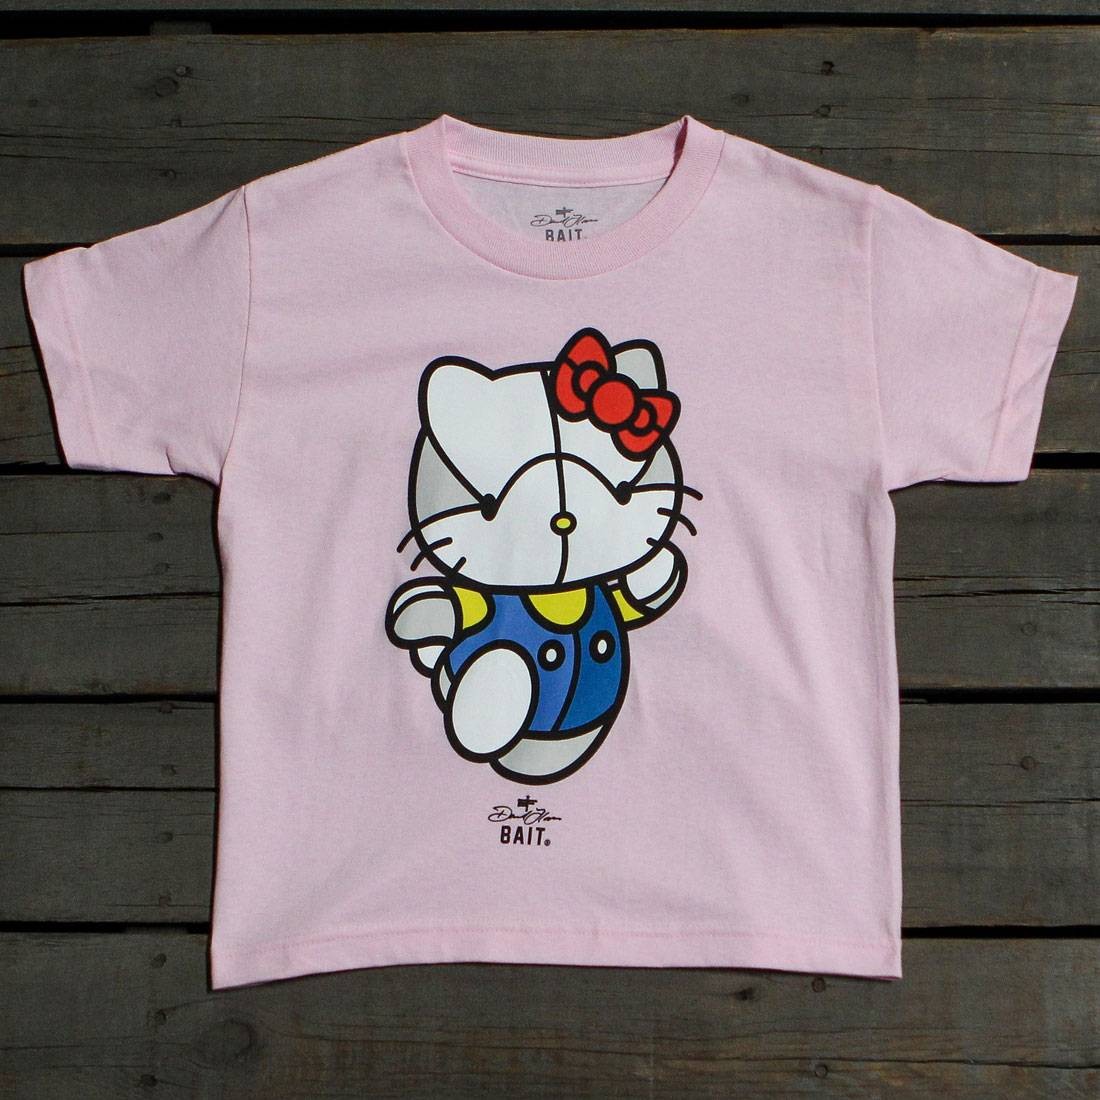 BAIT x David Flores Hello Kitty Youth Tee (pink)